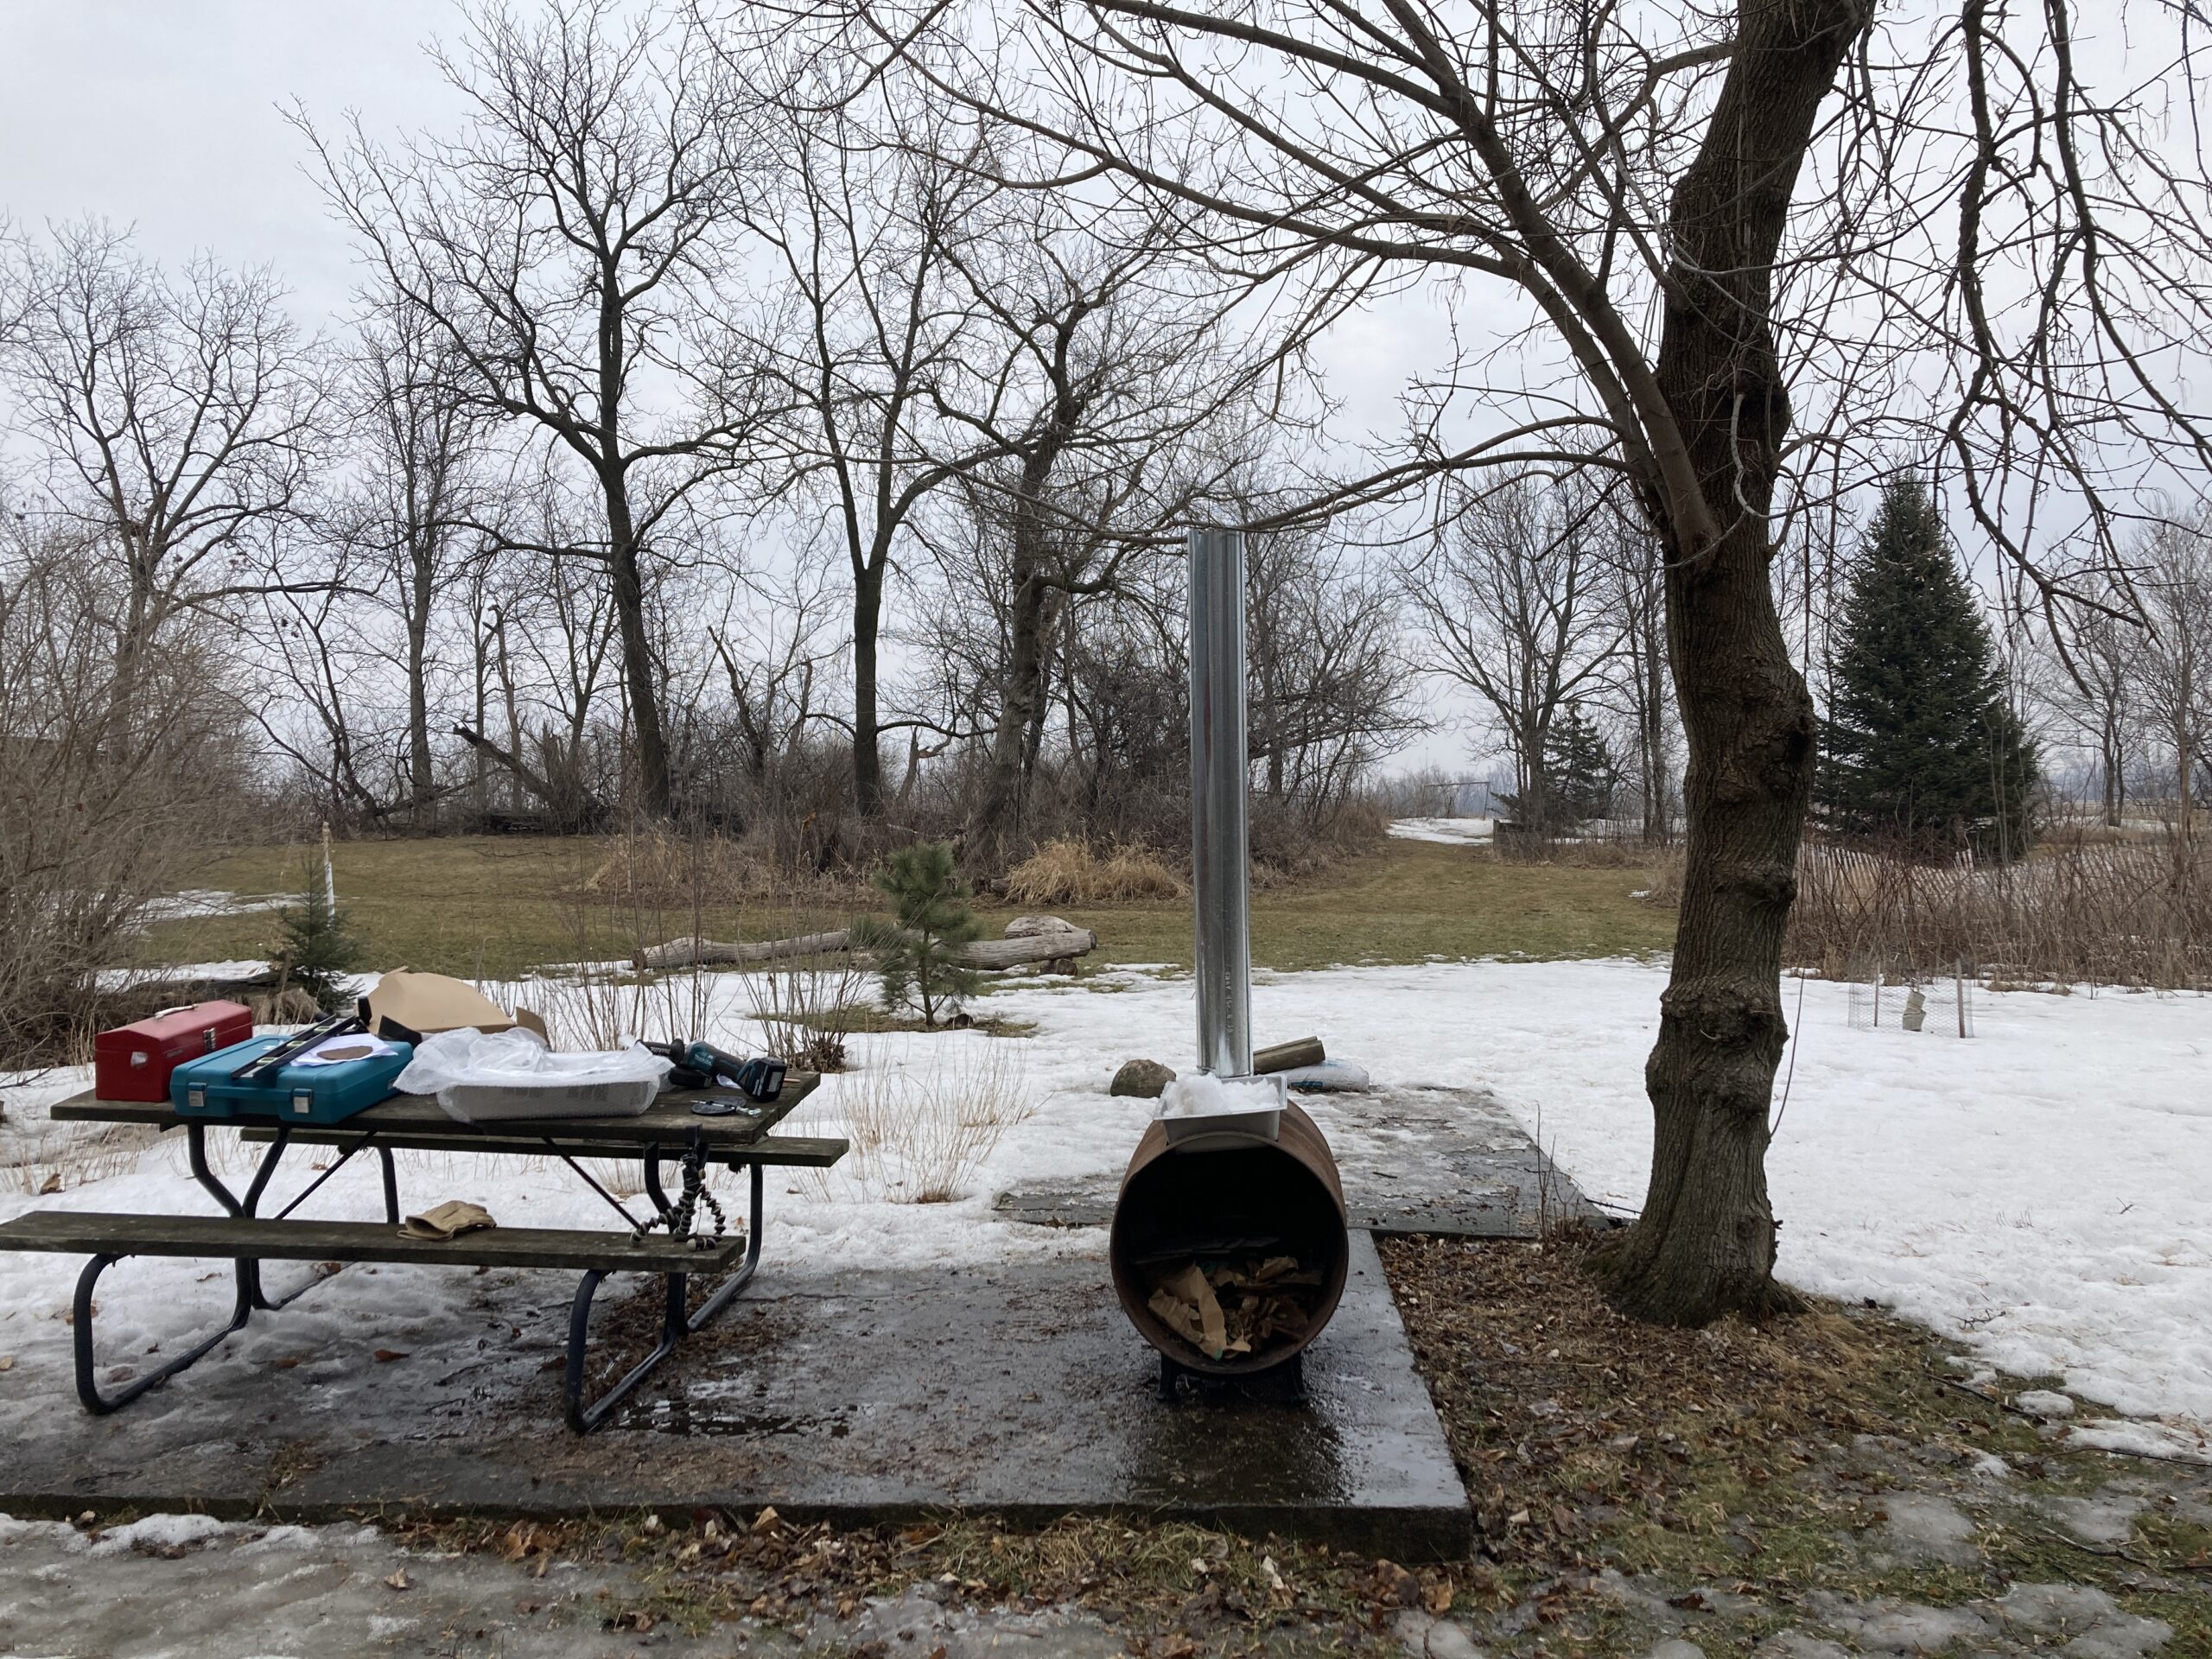 A homemade maple syrup evaporator sits on an old cement pad outside ready to make maple syrup.